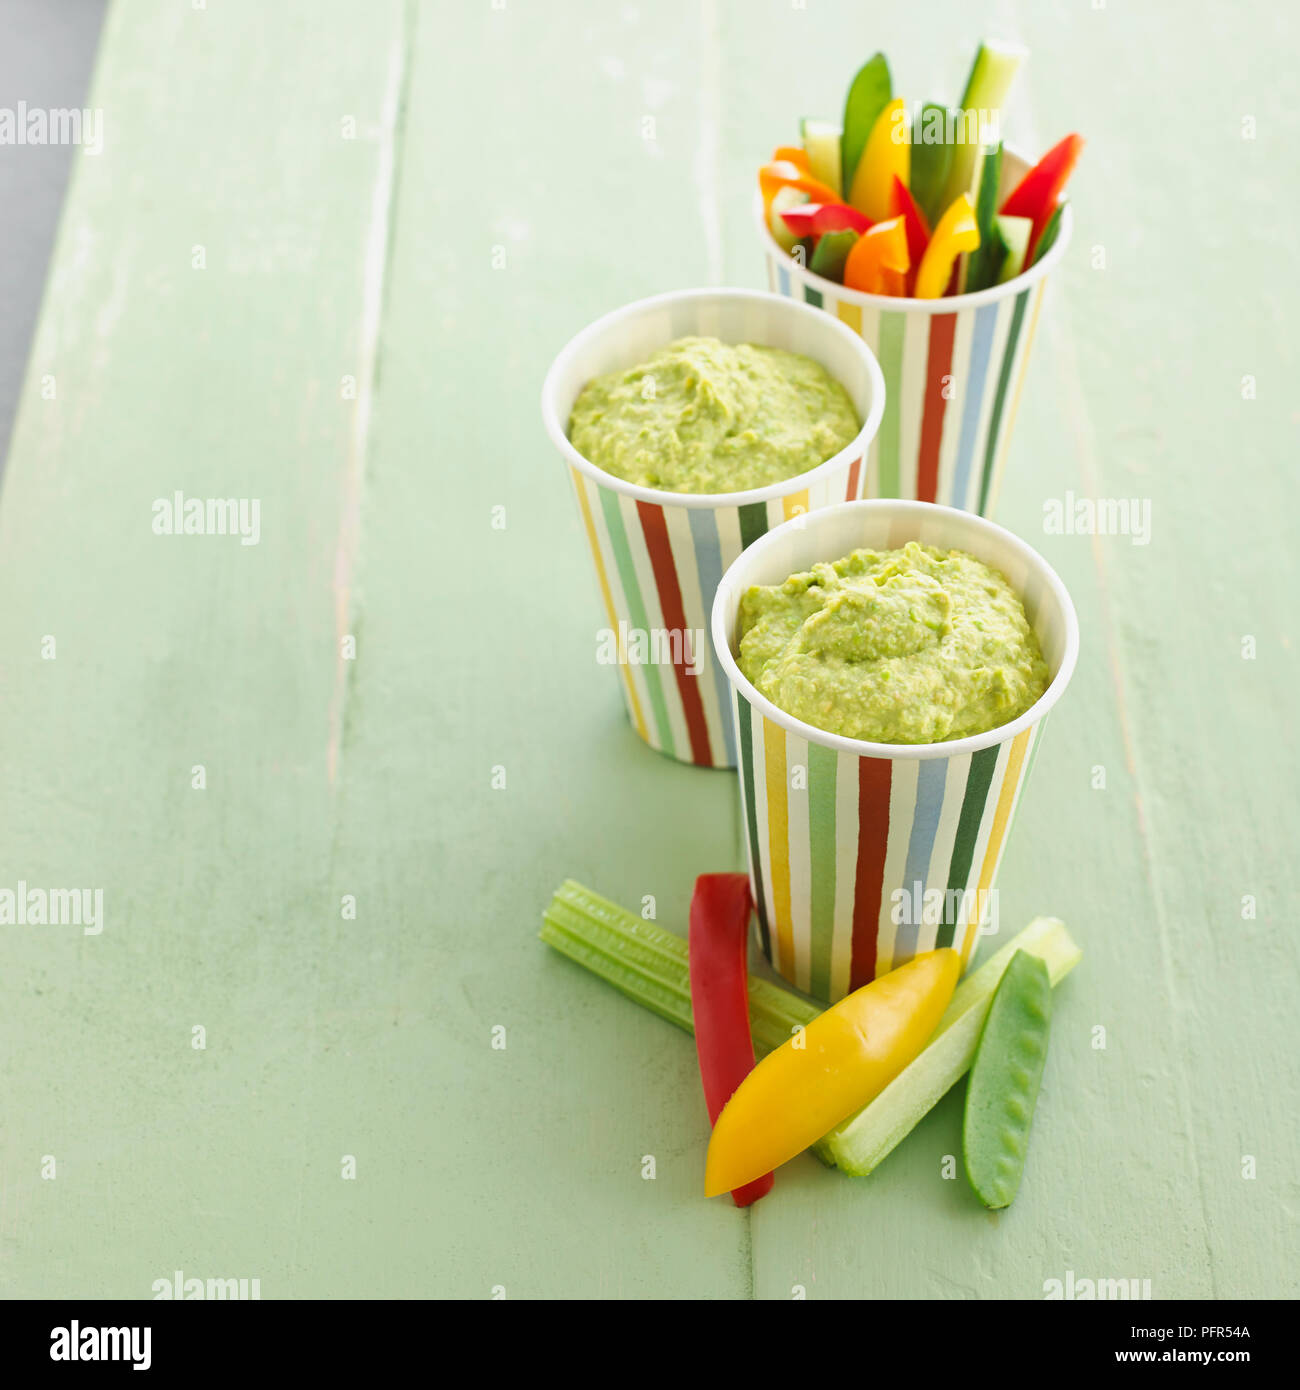 Cups of pea hummus and sticks of vegetable Stock Photo